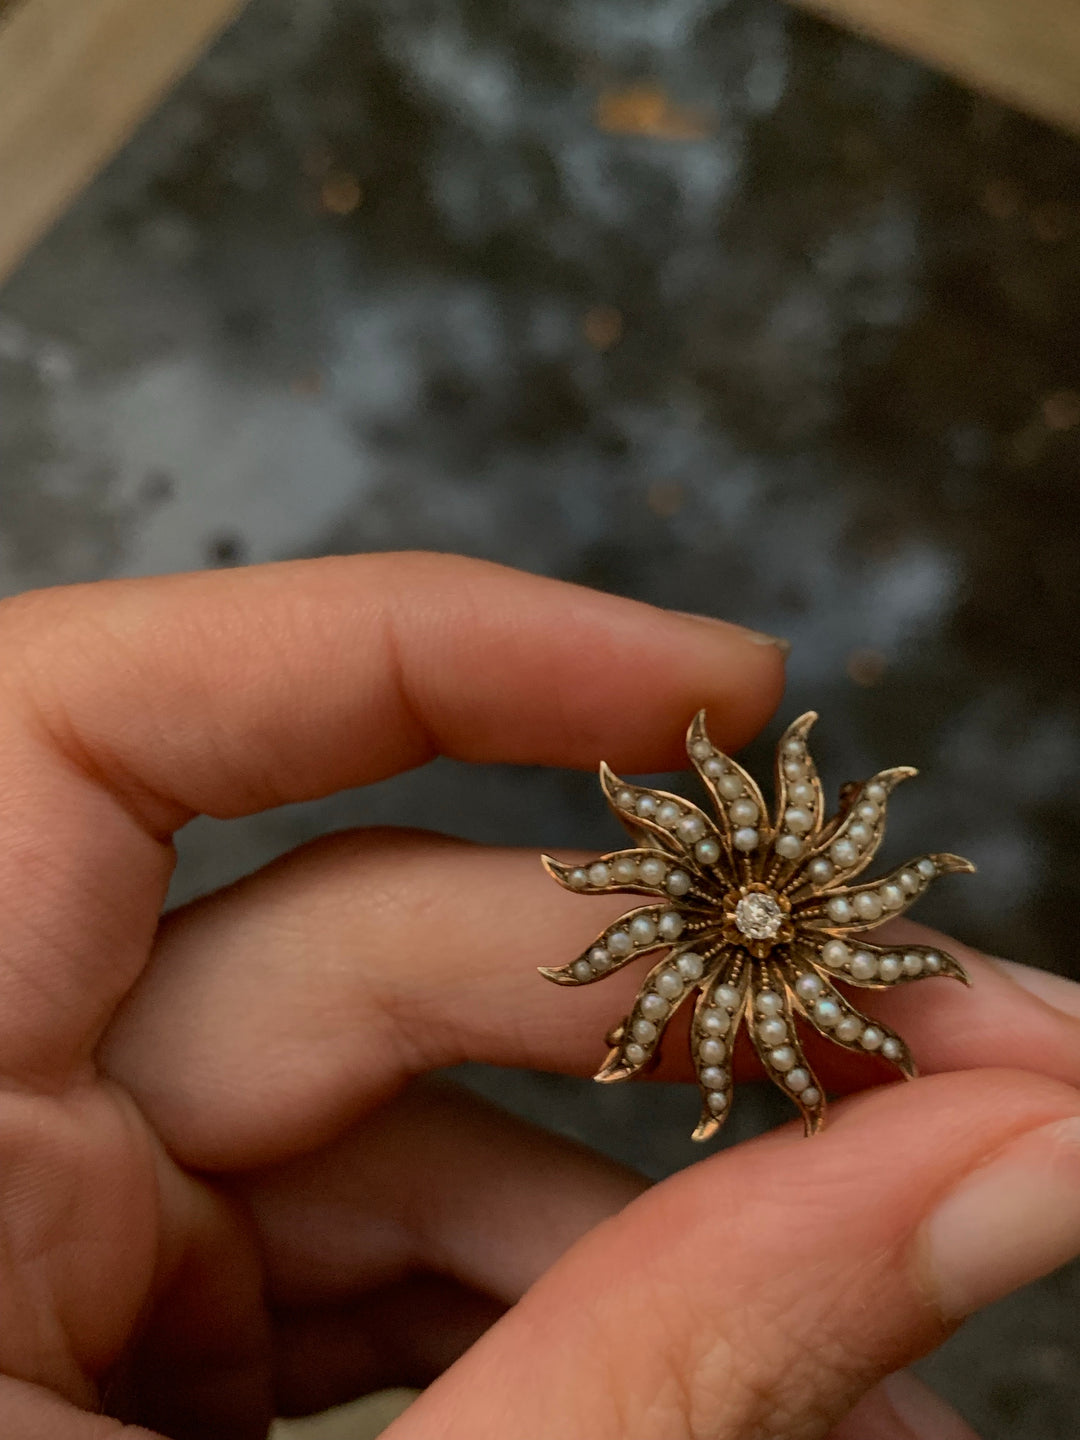 Extremely Cute American 14k Starburst Brooch with S Hook Circa 1900 with Seed Pearls and Diamond, 1” diameter